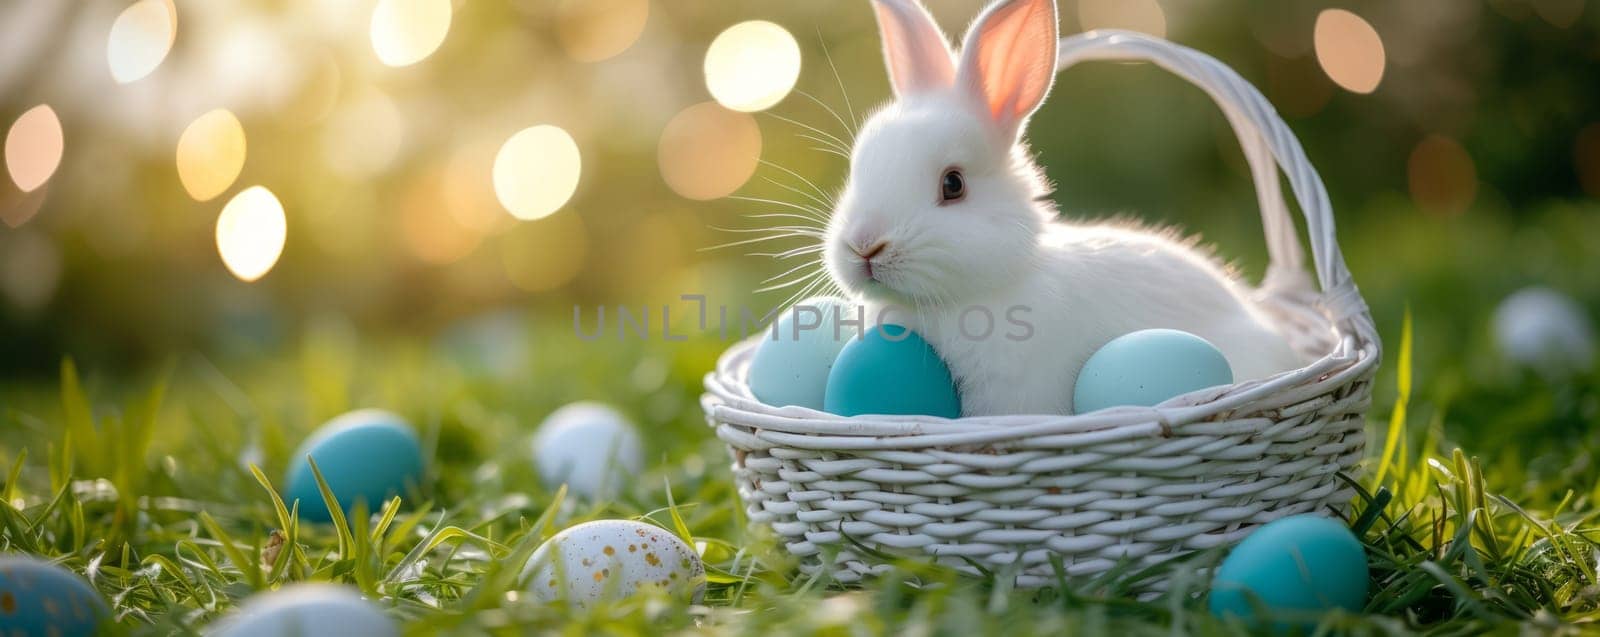 Beautiful Furry Easter Rabbit Bunny and Easter Eggs in Basket on Sunny Meadow. Bokeh Lights, Spring Garden, Traditional Easter Scene. by iliris